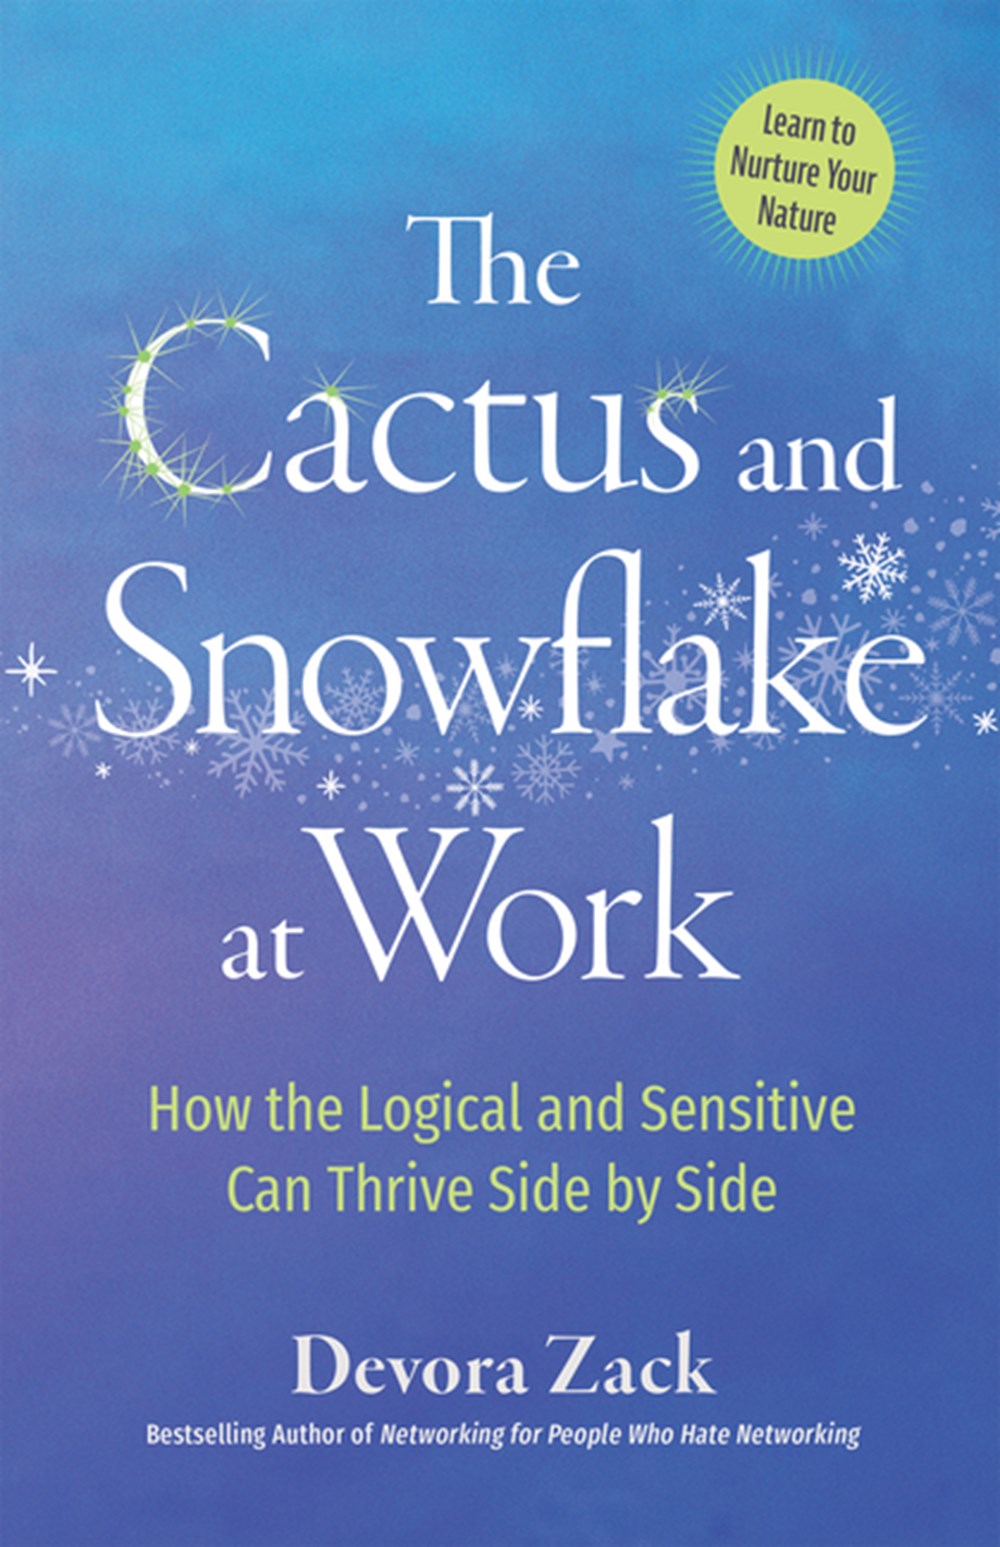 Cactus and Snowflake at Work: How the Logical and Sensitive Can Thrive Side by Side